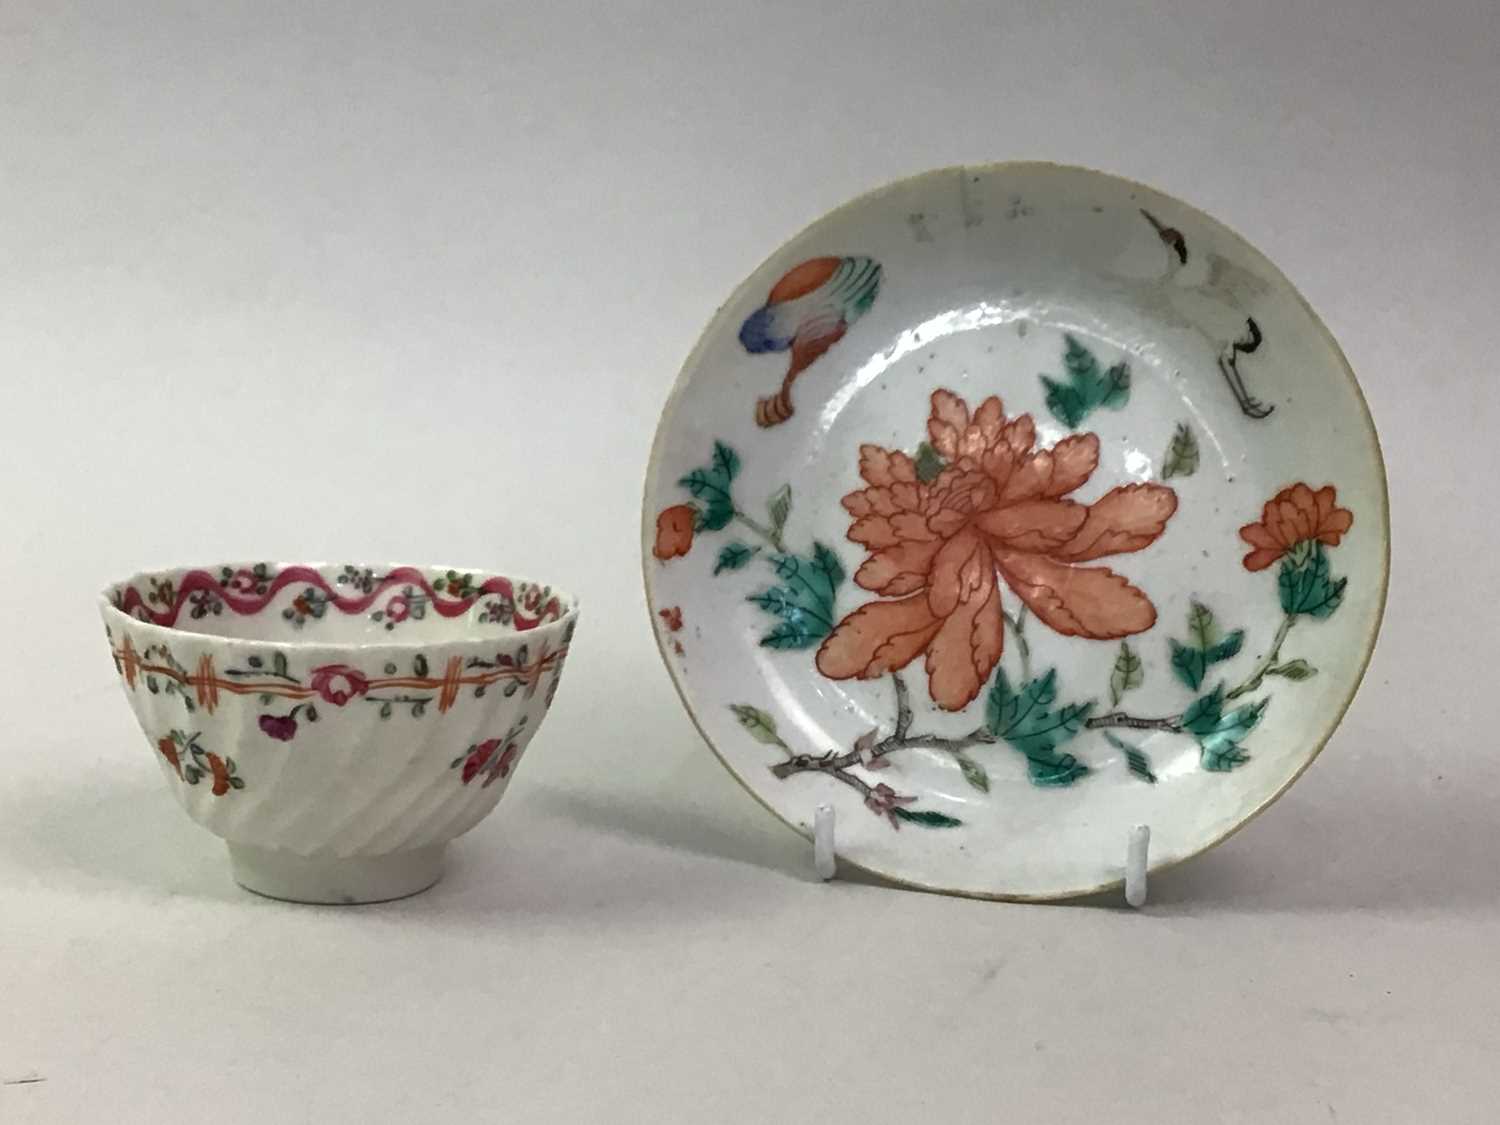 NAUTALIS PORCELAIN CUP, SAUCER, SIDE PLATE AND BISCUIT PLATE, ALONG WITH 18TH CENTURY AND LATER ENGL - Image 5 of 7